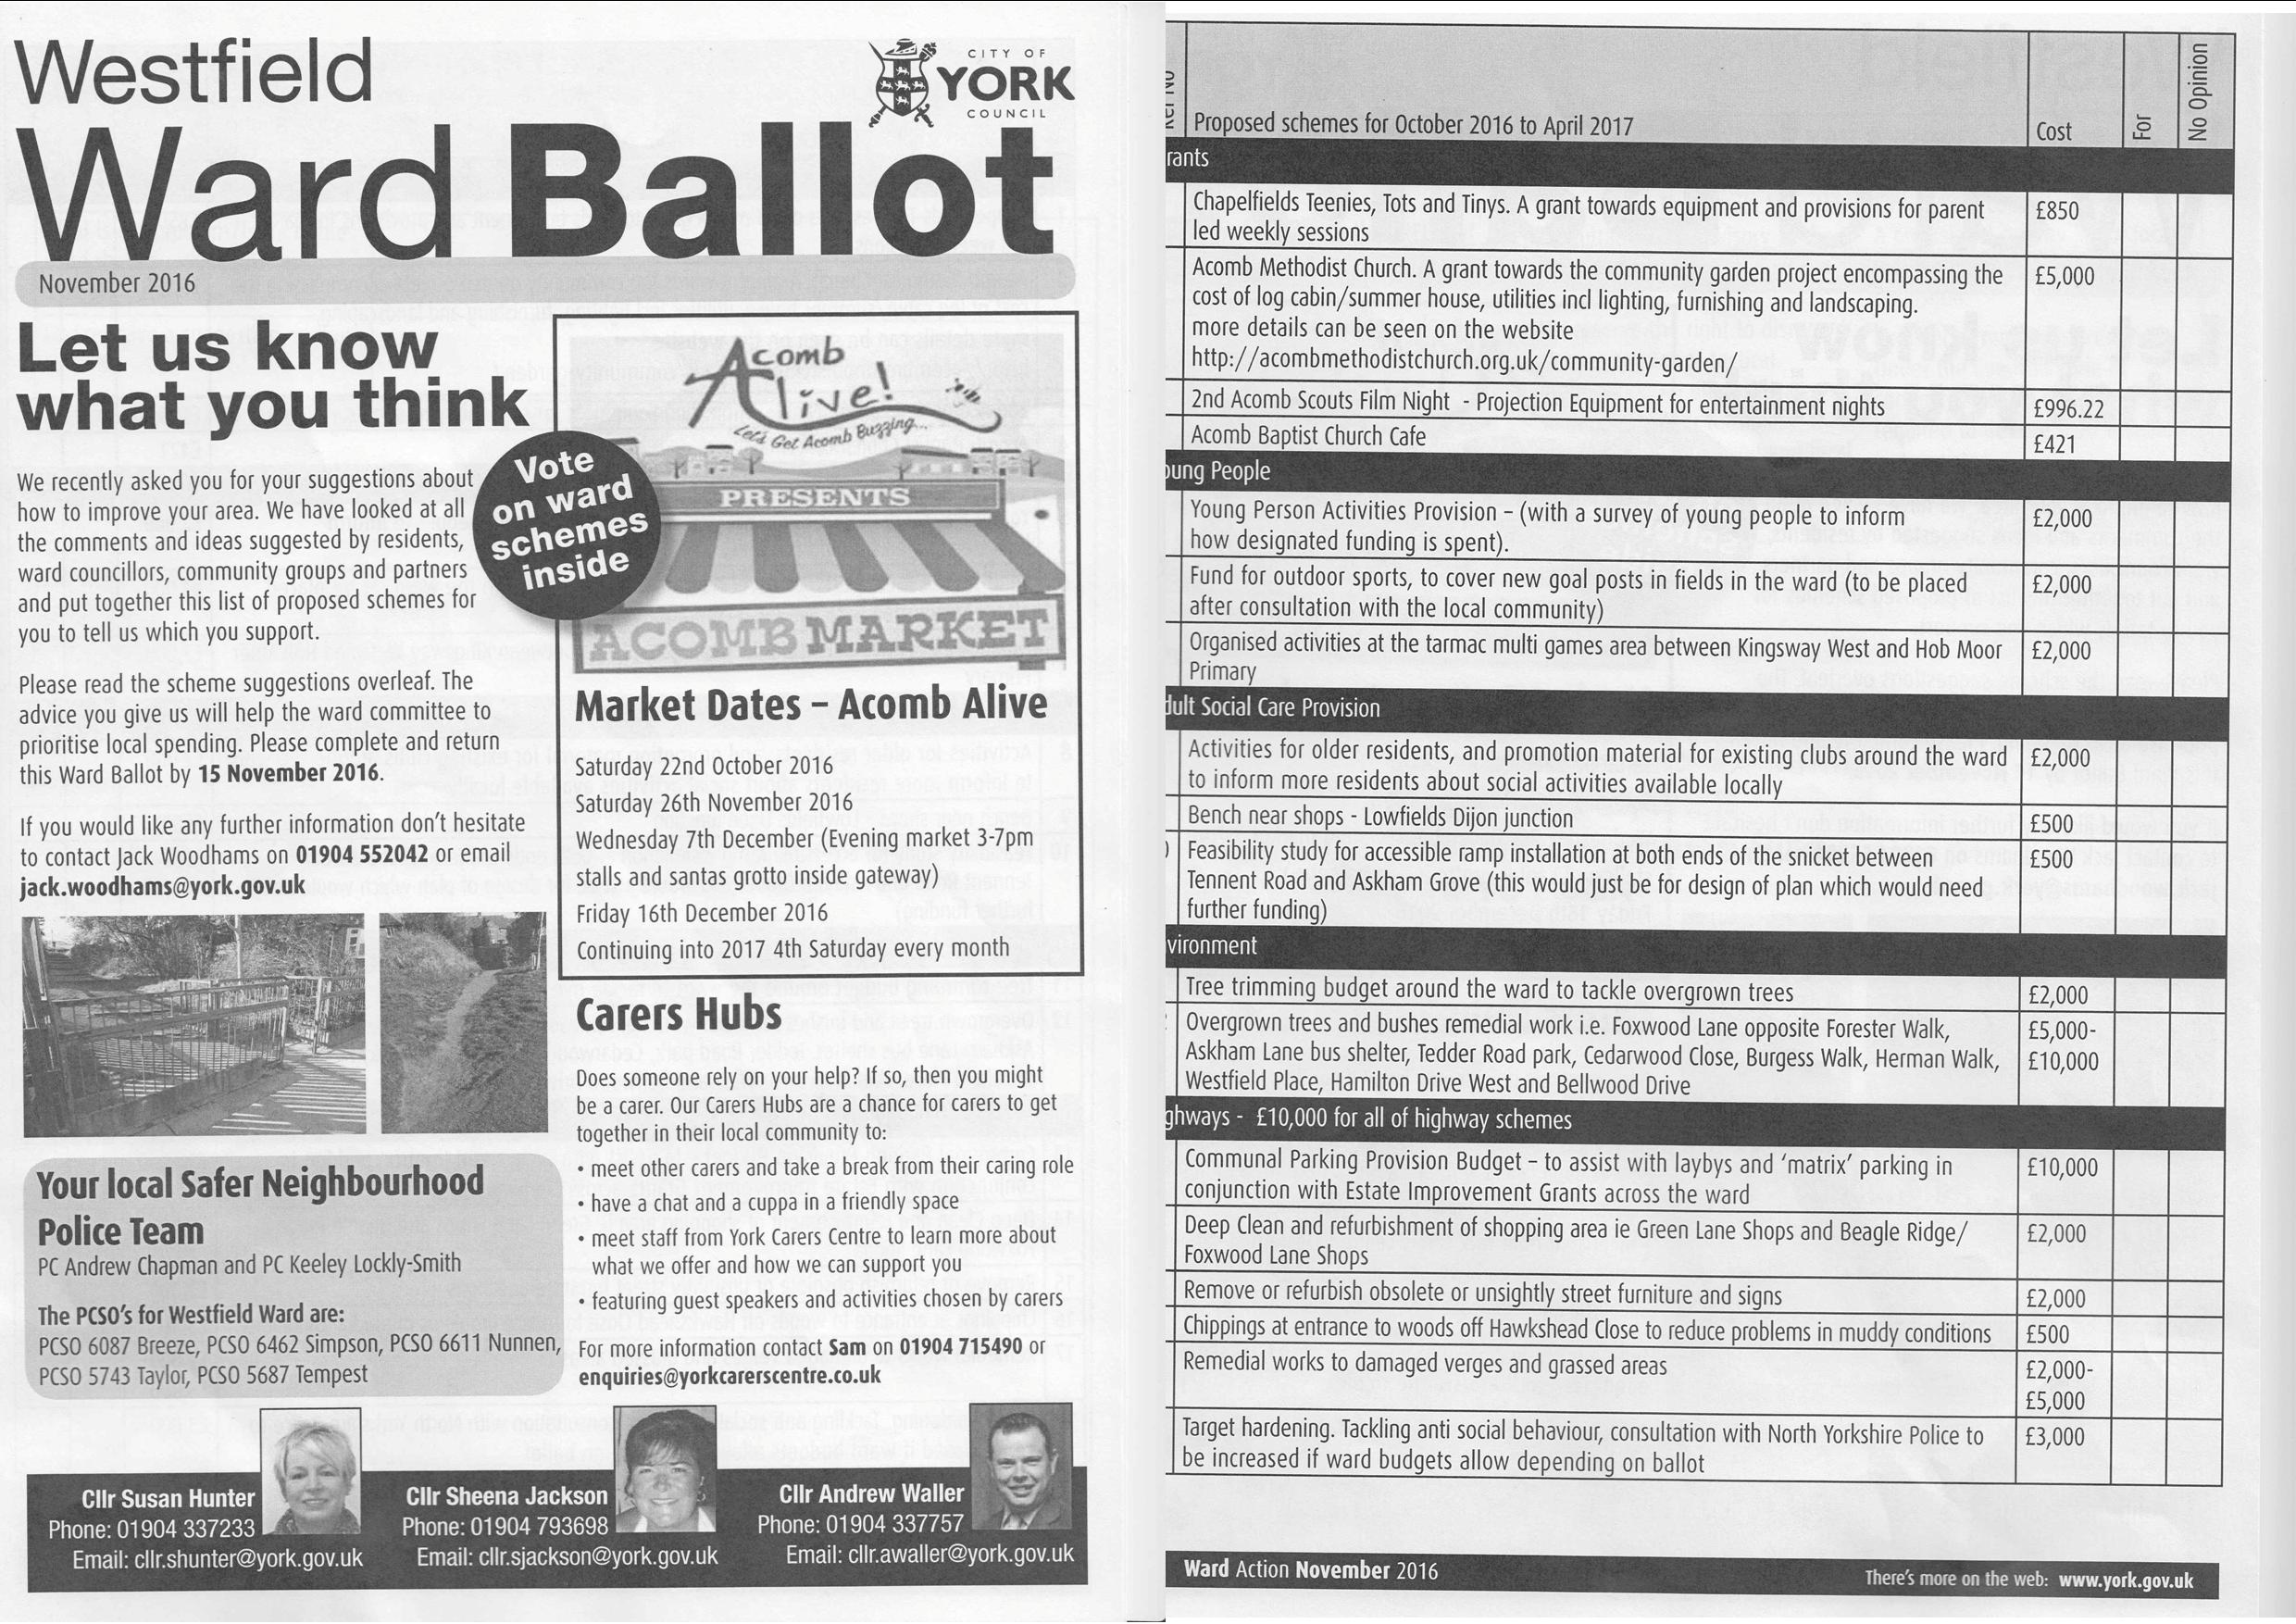 After a delay, the Ward Committee published and started to distribute a ballot paper. This gives residents the opportunity to decide how a delegated budget should be spent in the local area. 